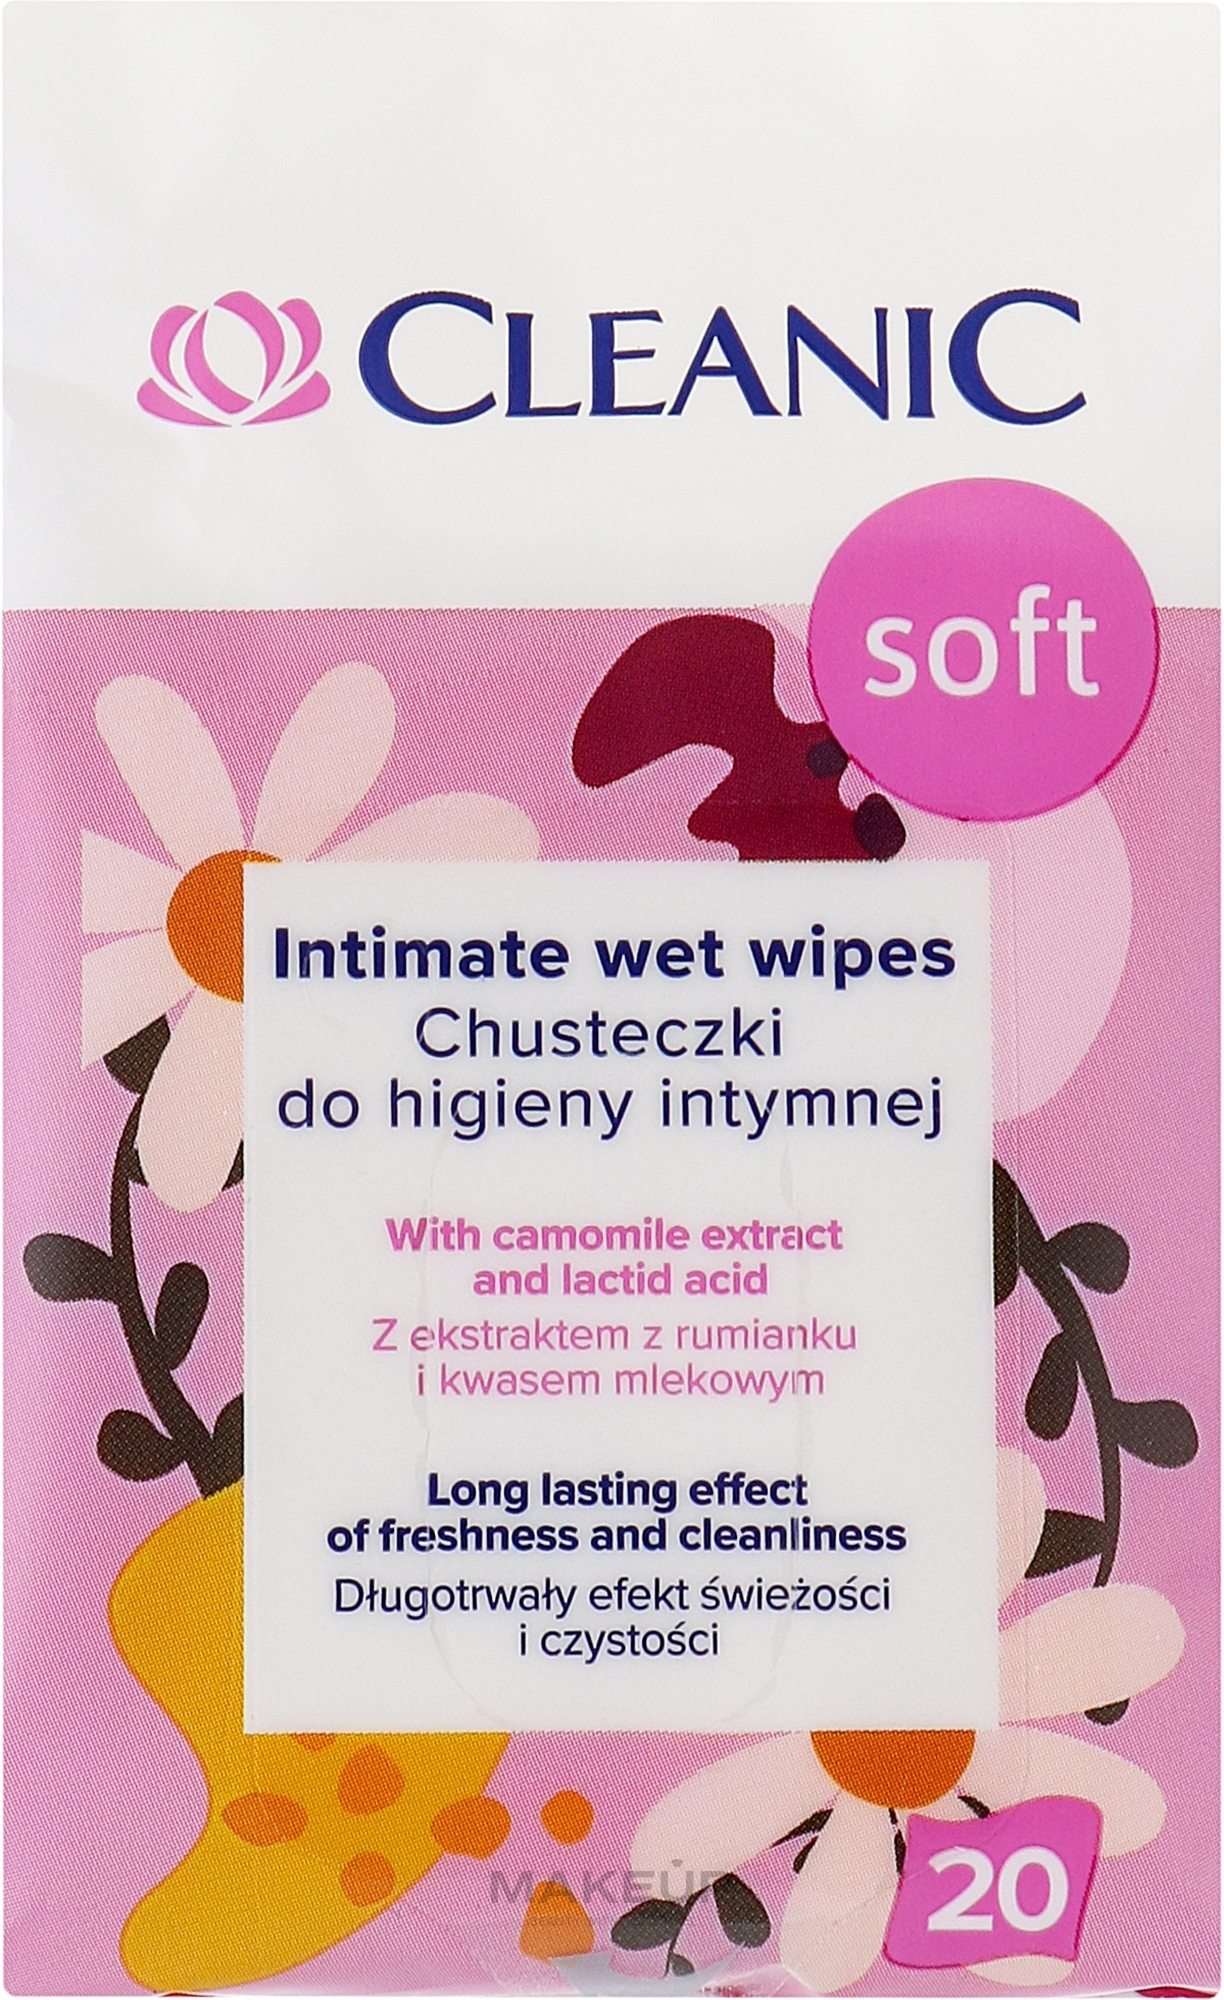 Intimate Hygiene Wet Wipes, 20 pcs - Cleanic Soft Intimate Wet Wipes — photo 20 szt.